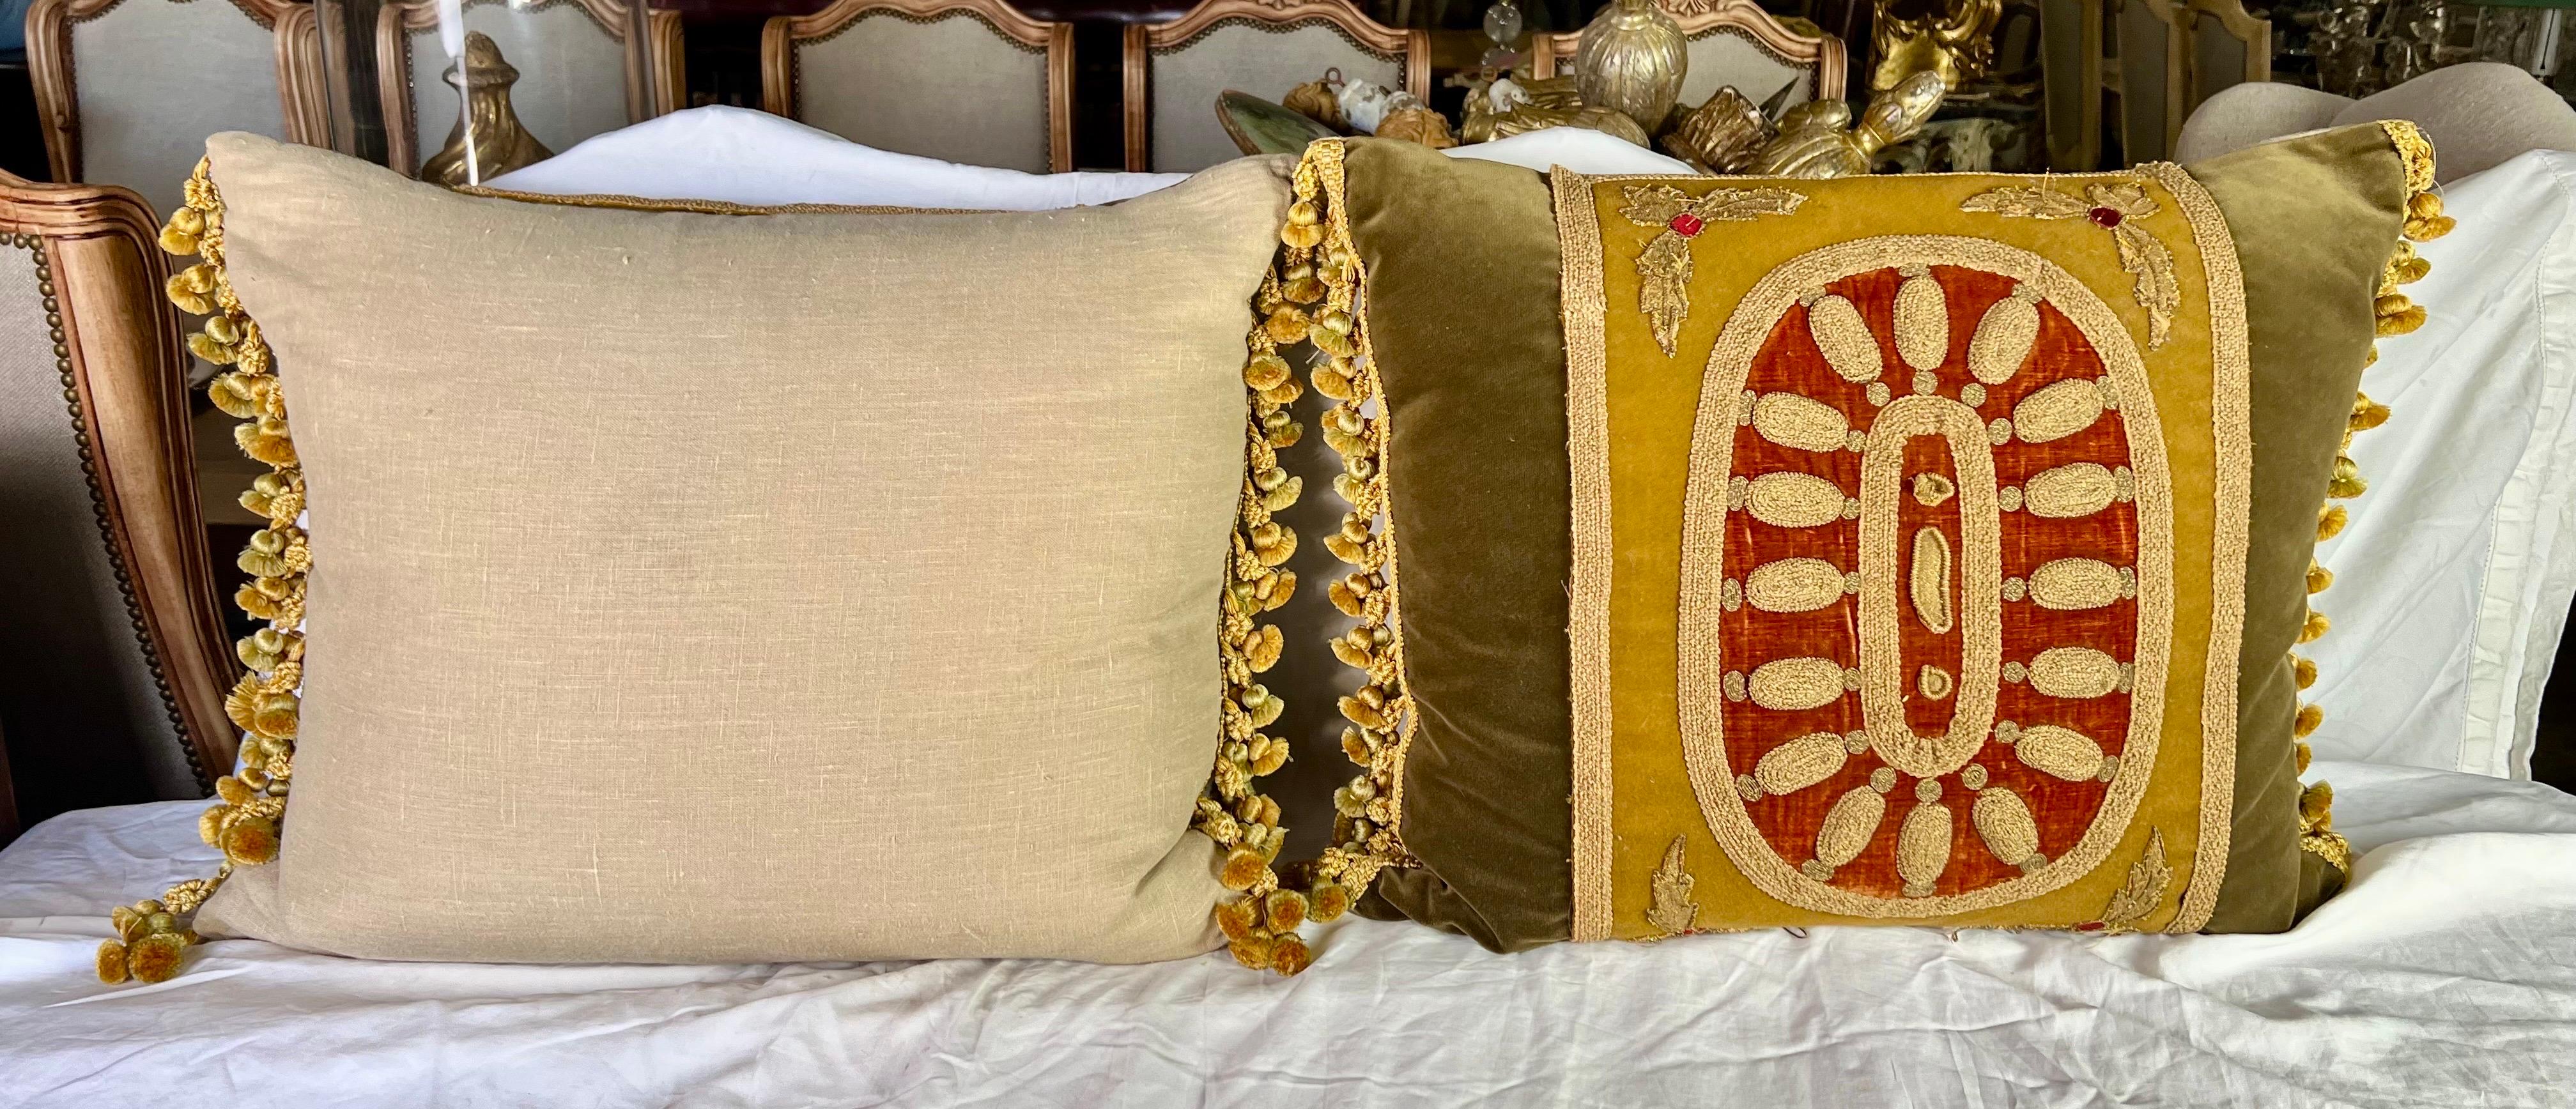 Pair of 19th C. Metallic Embroidered Pillows w/ Trim For Sale 1